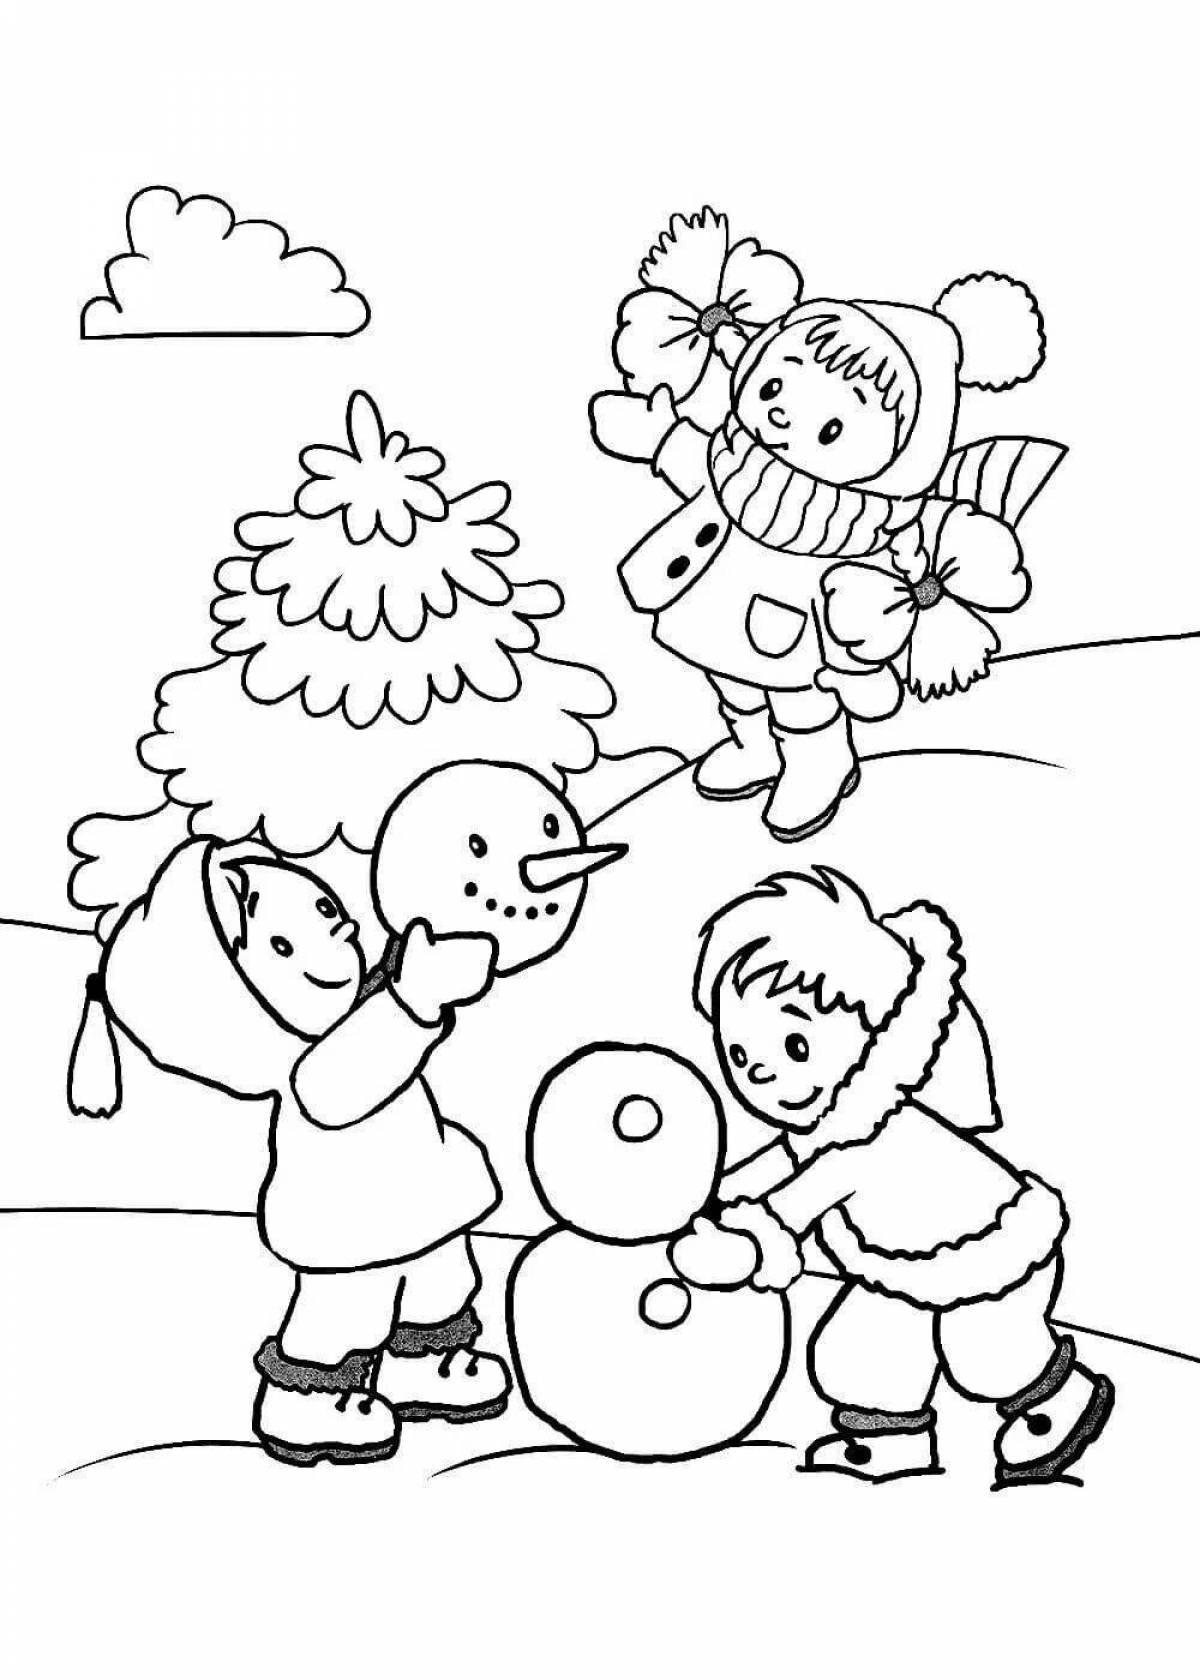 Glitter winter coloring book for 2-3 year olds